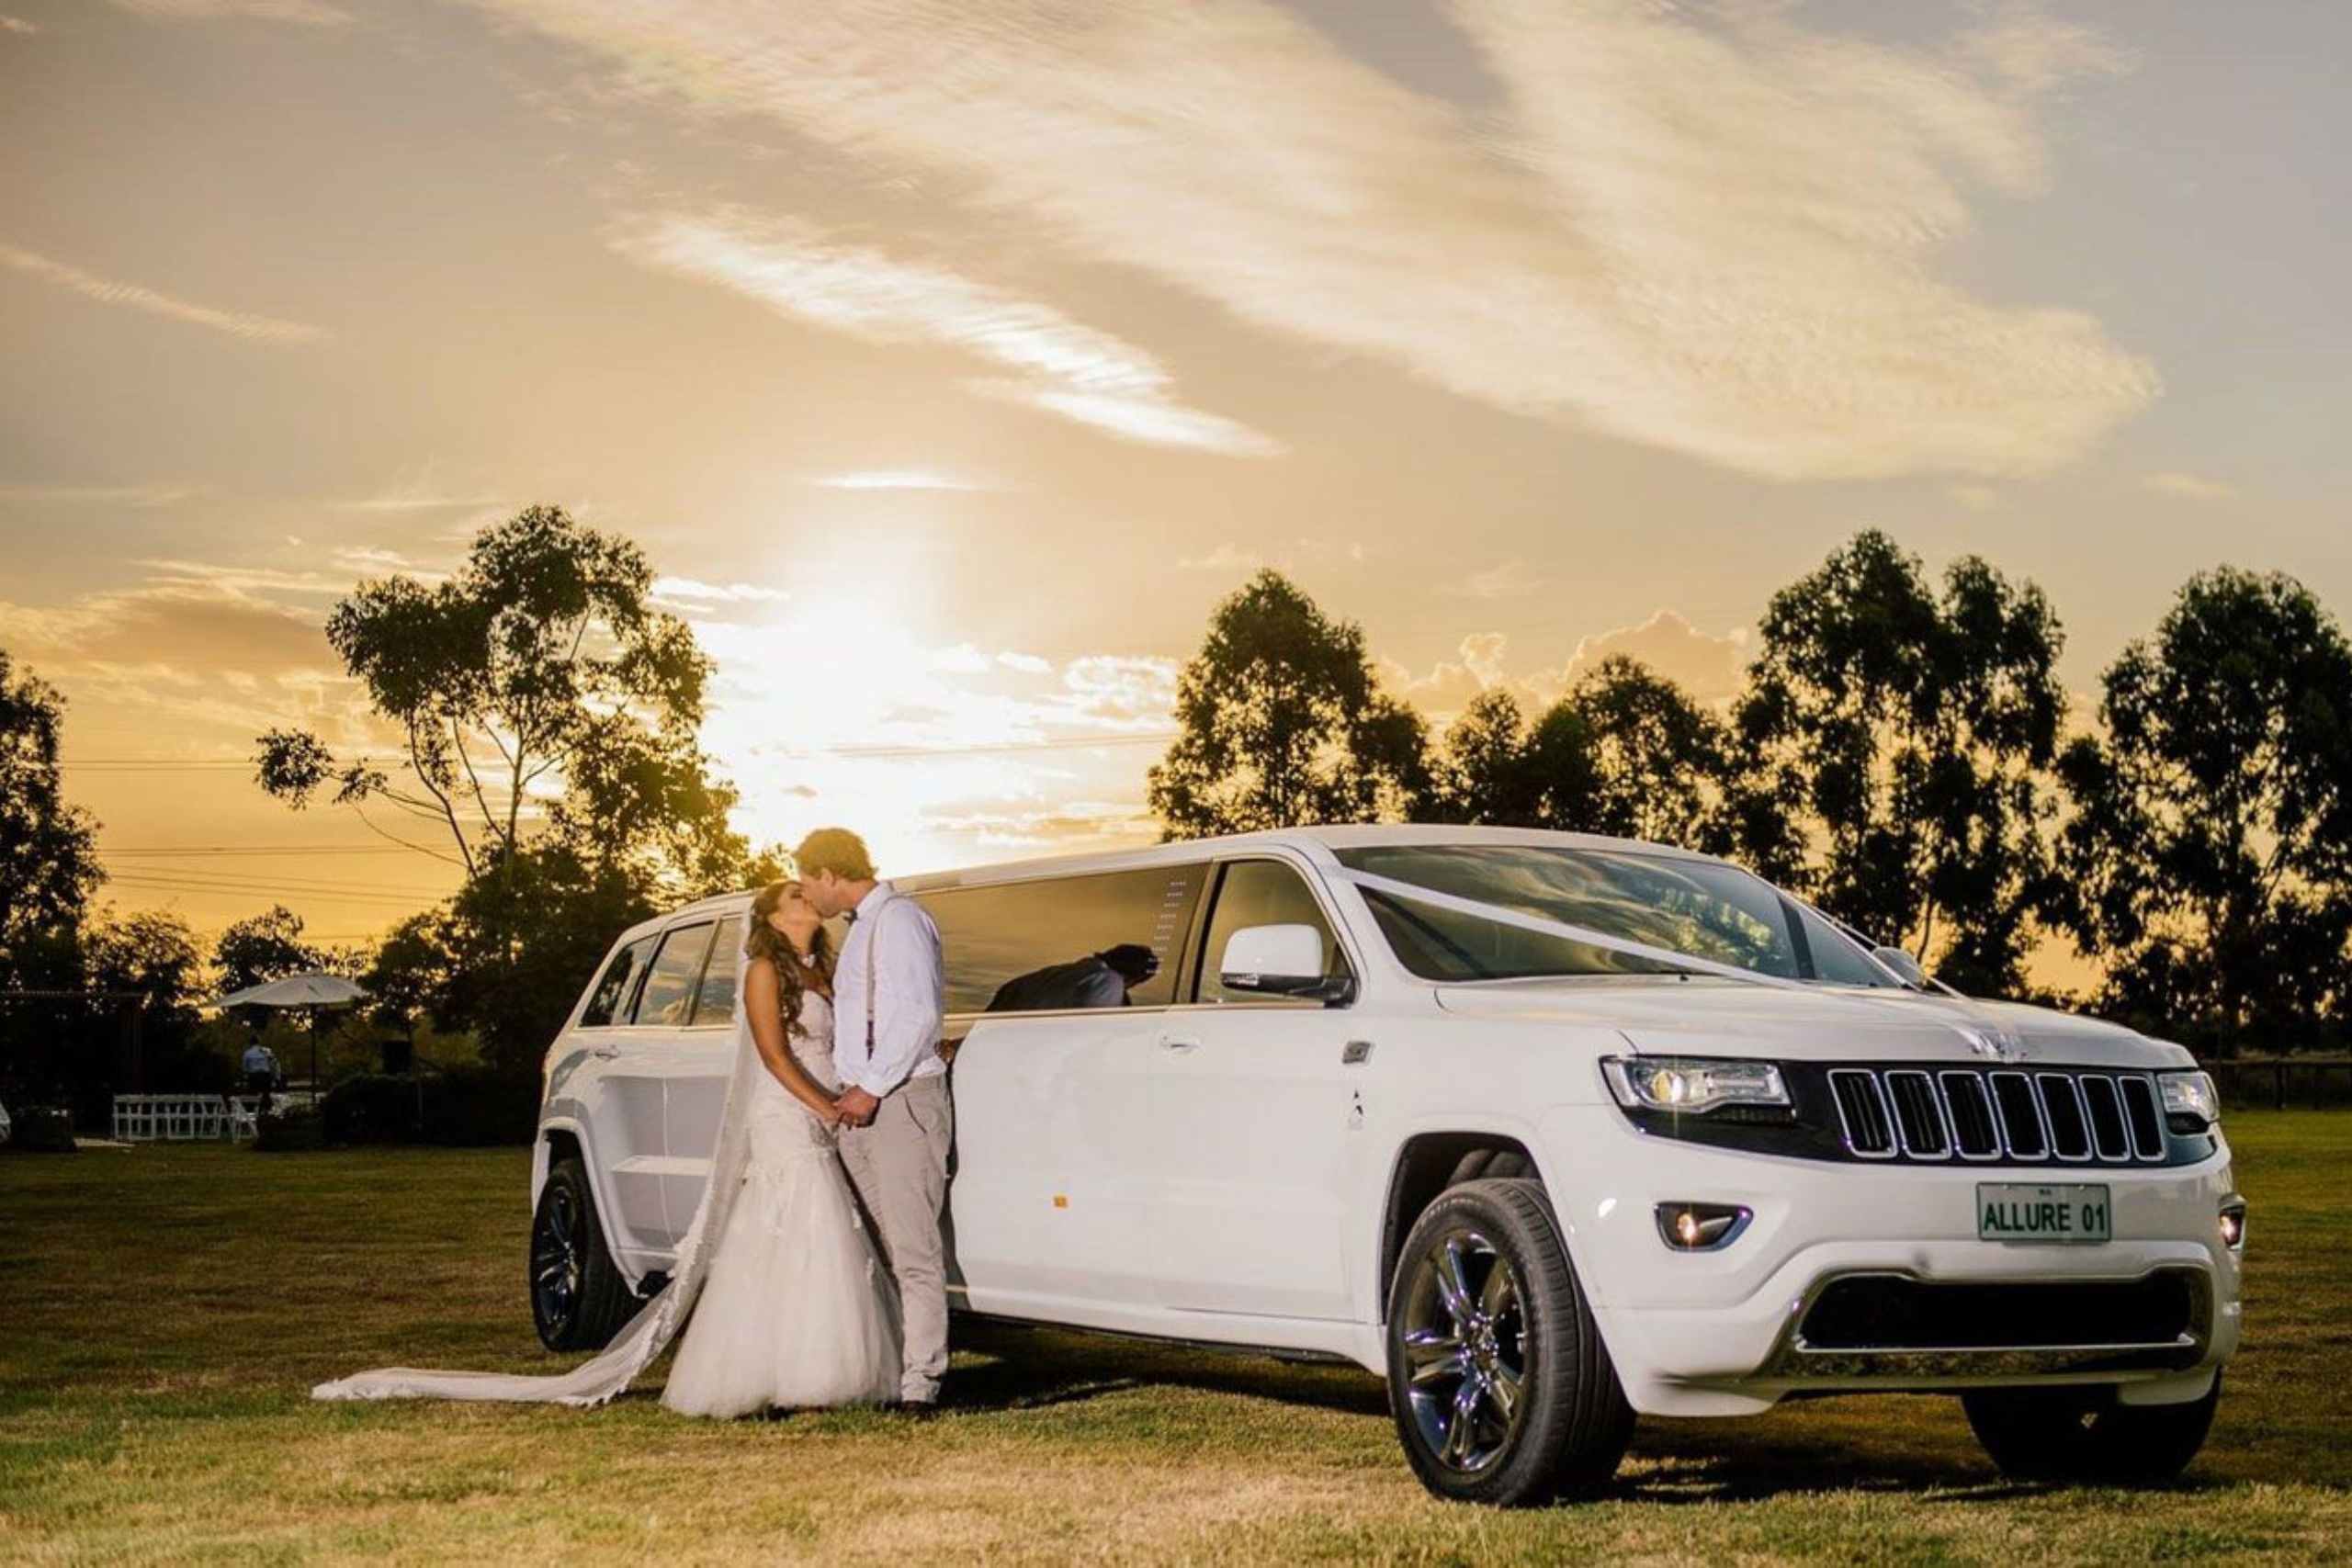 Make your day Memorable with a Wedding limo rental